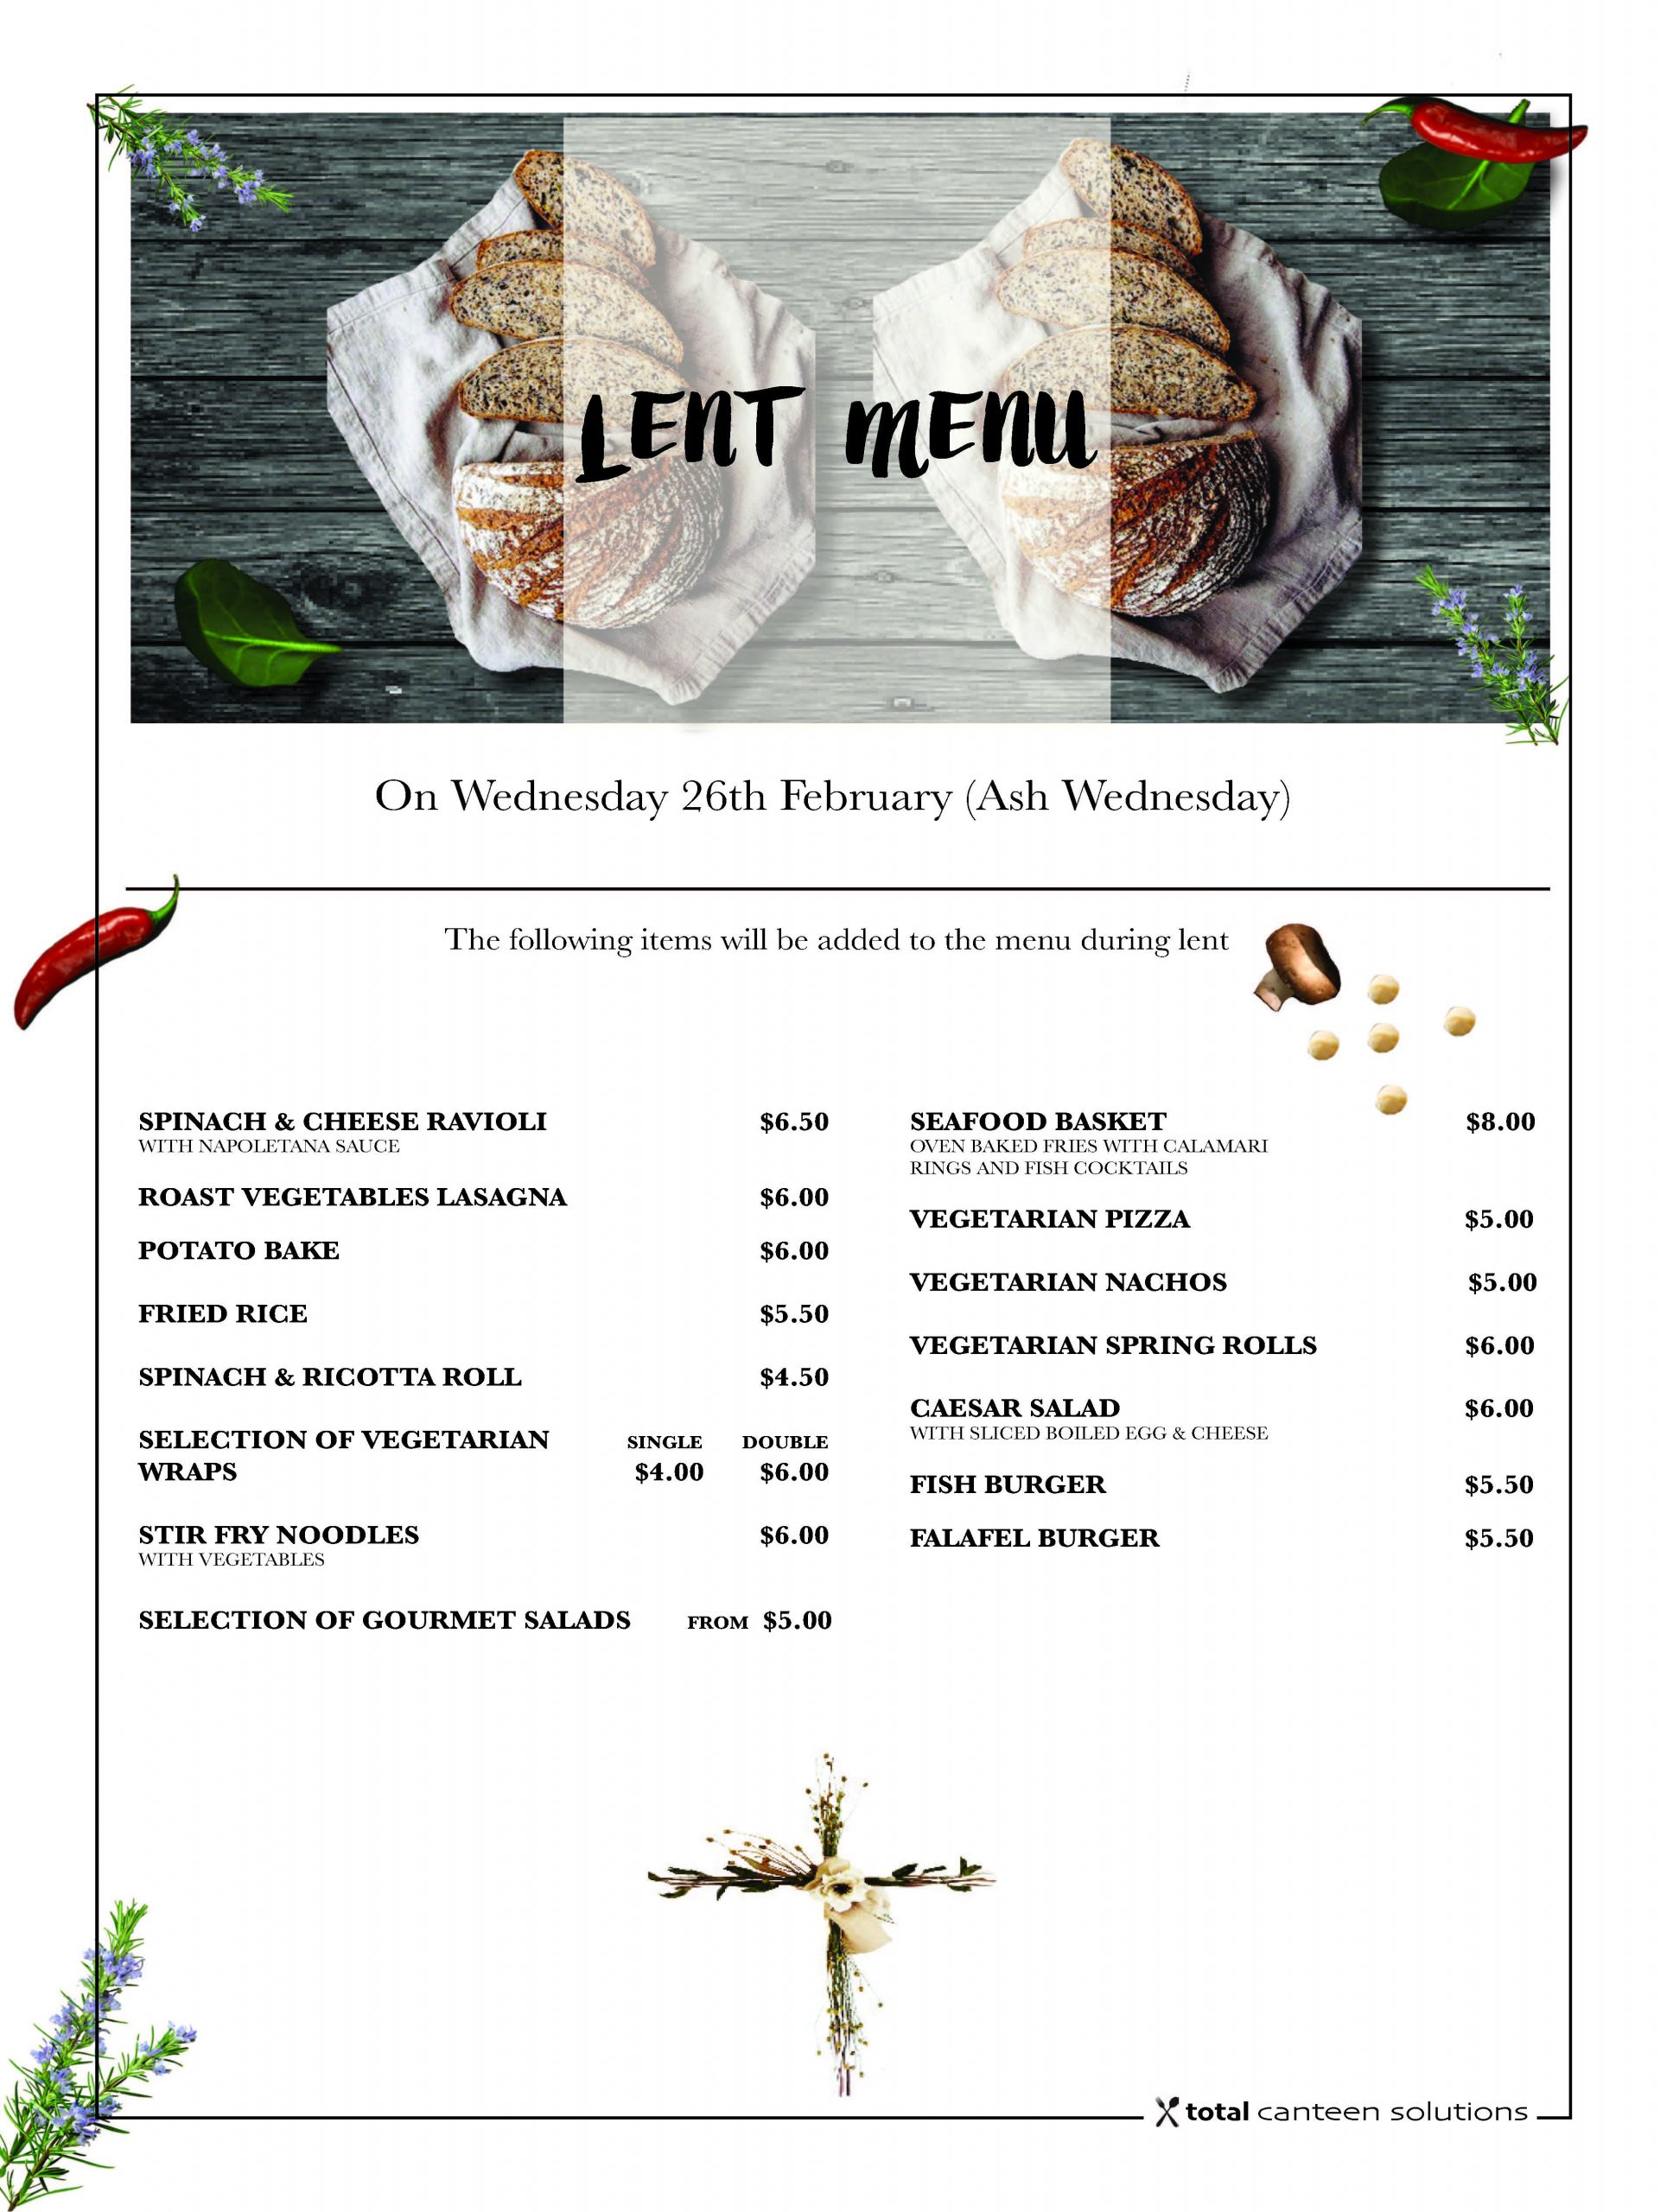 Canteen menu for Ash Wednesday and Lent